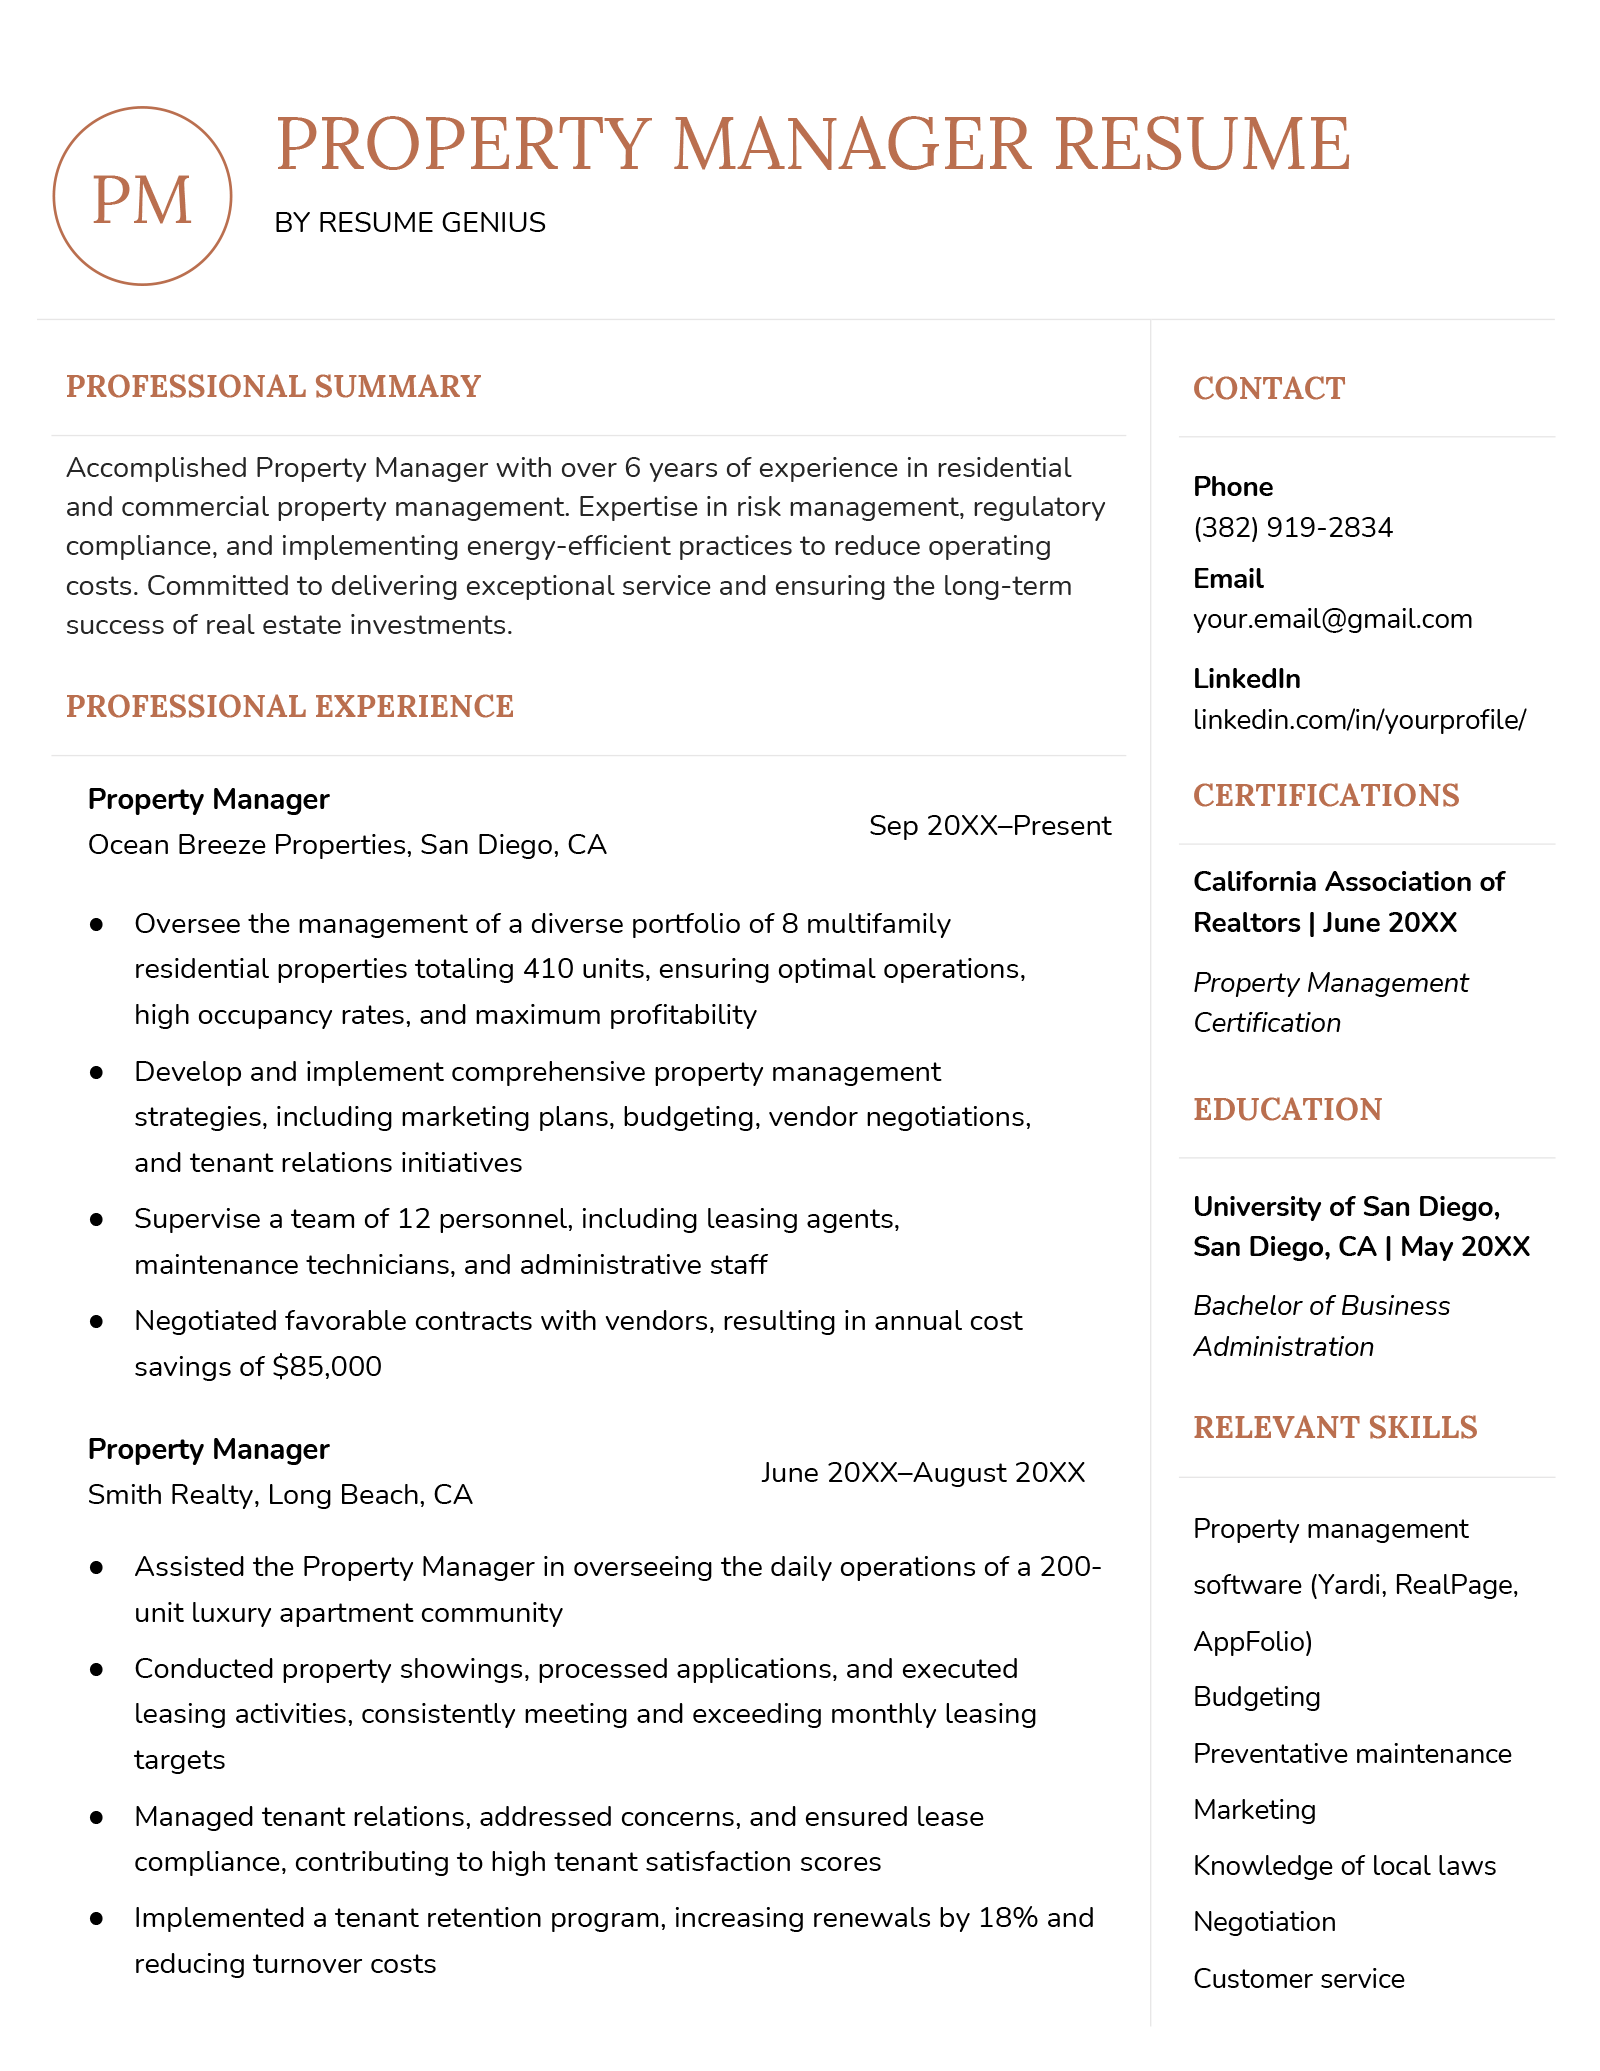 Example of a property manager resume.